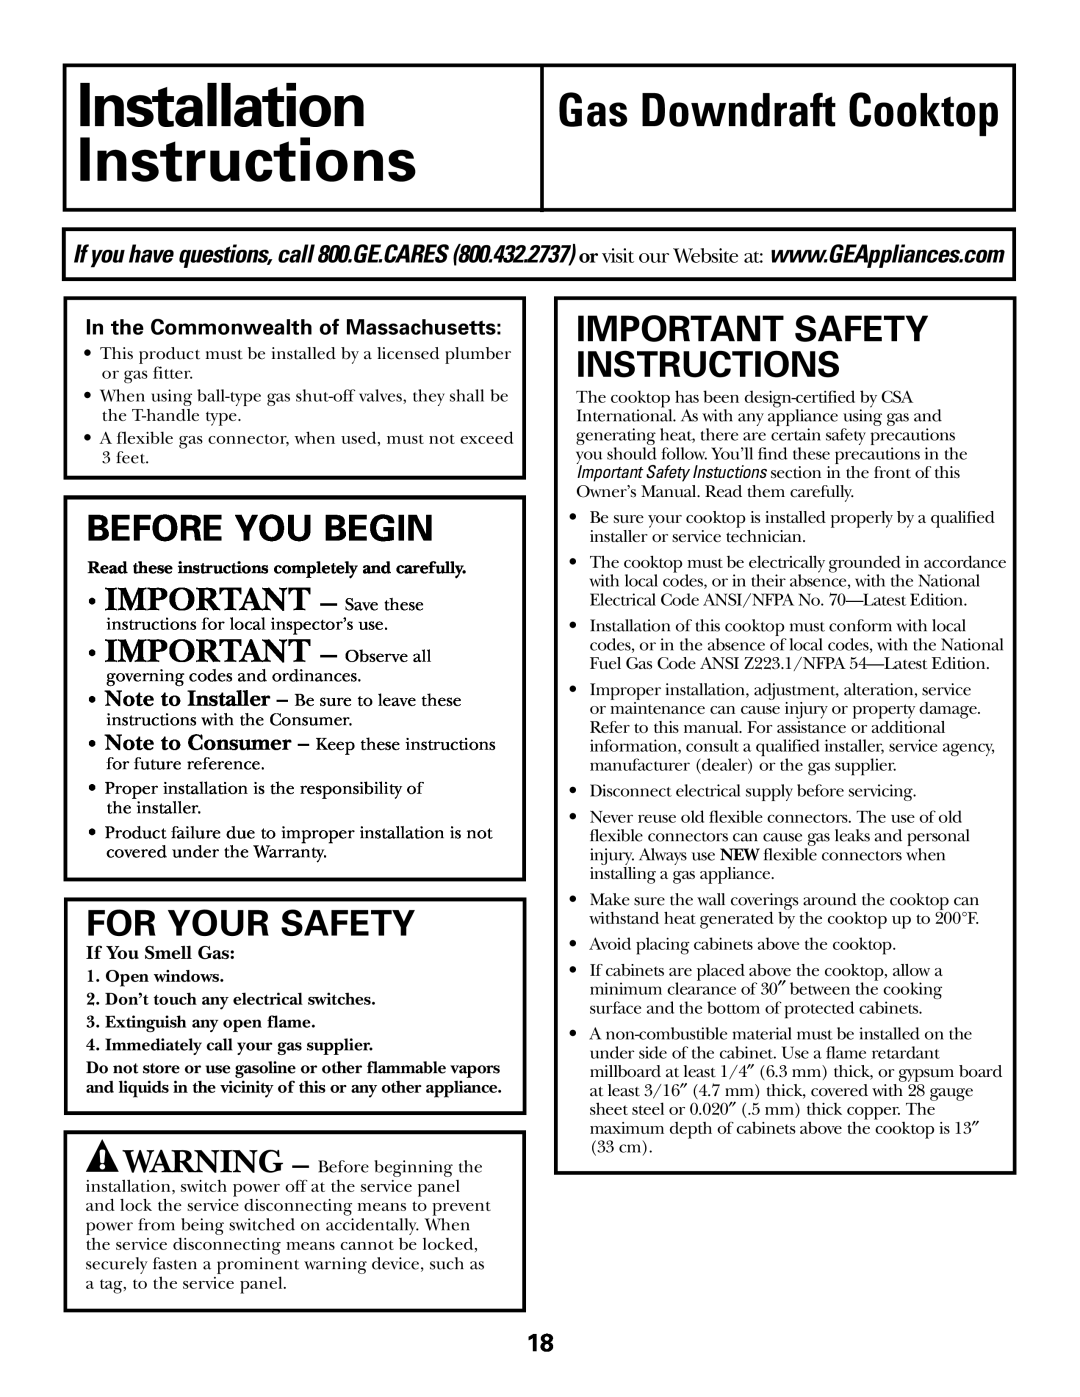 GE JGP985 Installation Instructions, Before You Begin, For Your Safety, Important Safety Instructions, Open windows 